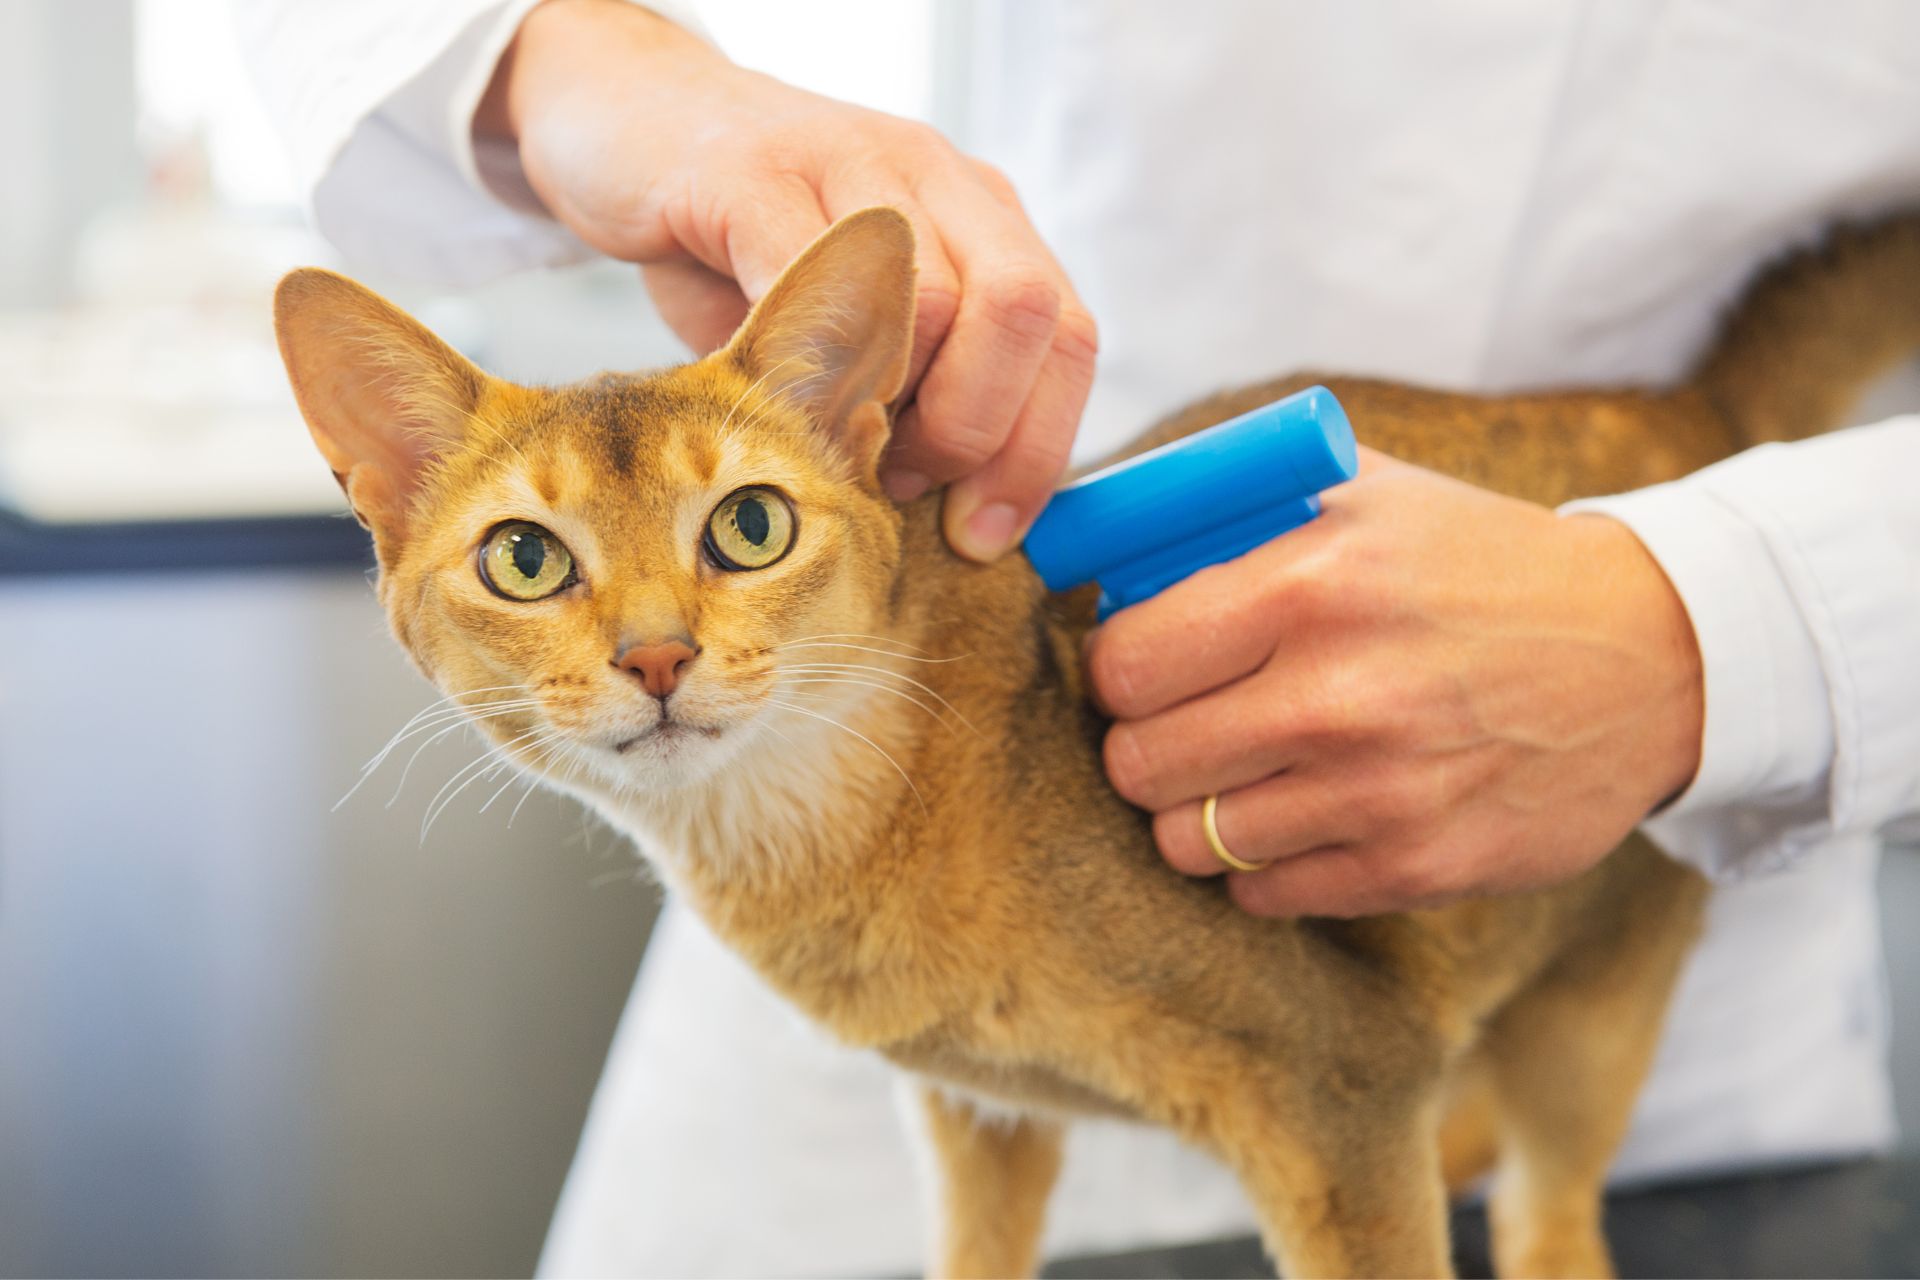 microchip implant for cat by vet